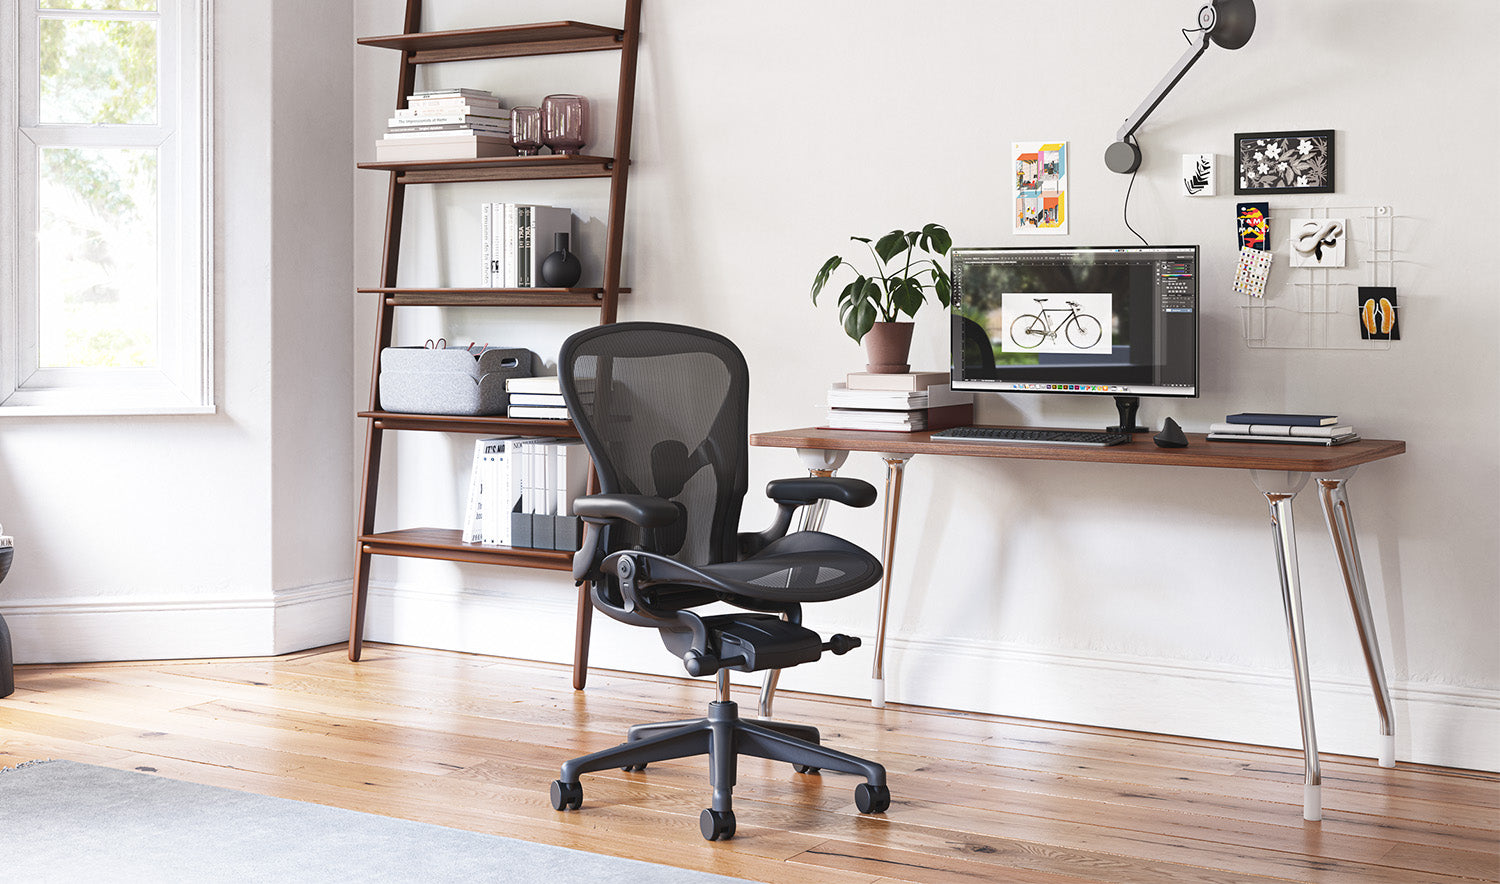 A graphite Aeron chair in front of an AbakEnvironments desk. A Hew side table and Folk shelving unit are against the walls in a home office.